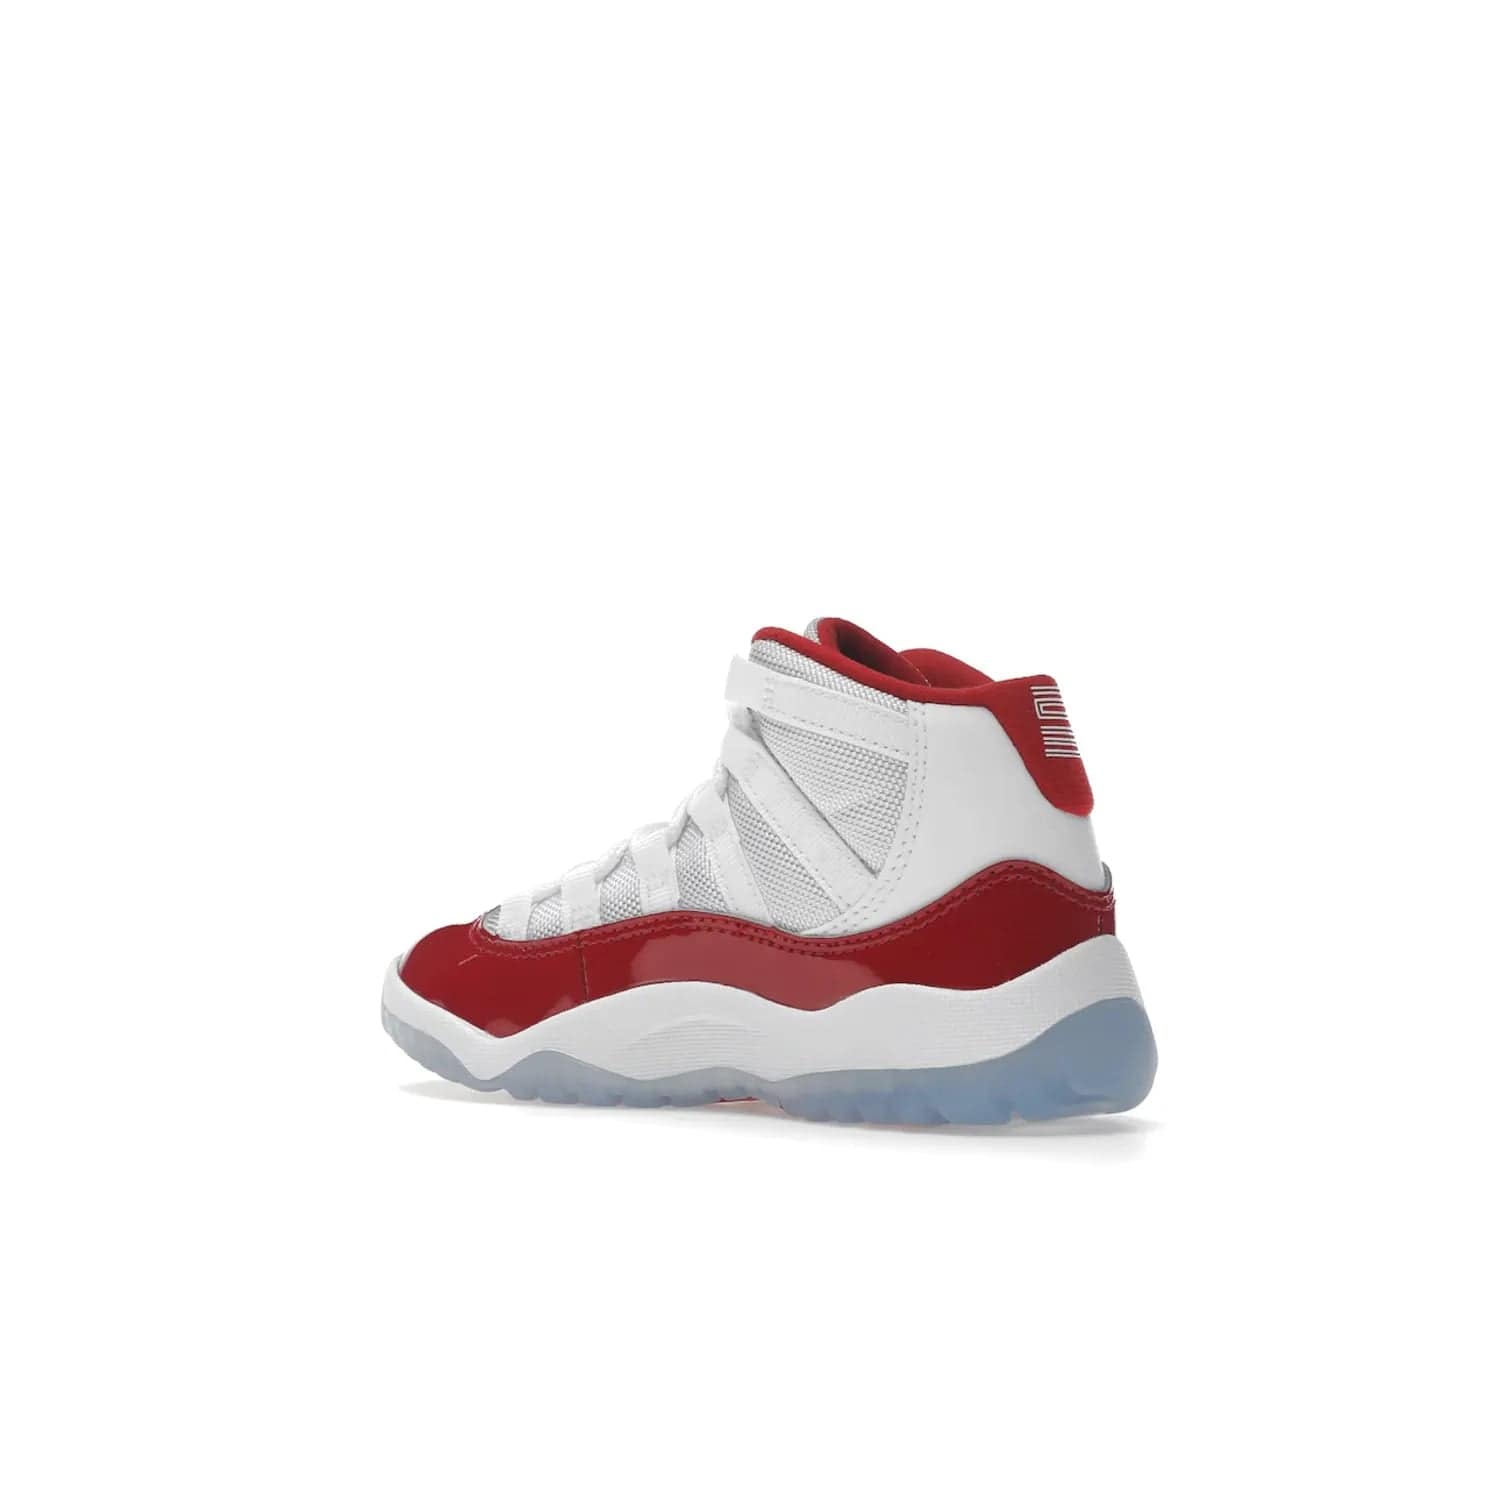 Jordan 11 Retro Cherry (2022) (PS) - Image 23 - Only at www.BallersClubKickz.com - An iconic silhouette with a timeless look, the Air Jordan 11 Retro Cherry 2022 PS features a crisp White, Varsity Red and Black colorway. The upper is made of ballistic mesh, a red patent leather mudguard, '23' branding and white Phylon midsole. Get optimal cushioning and comfort on December 10th, 2022. Don't miss out.